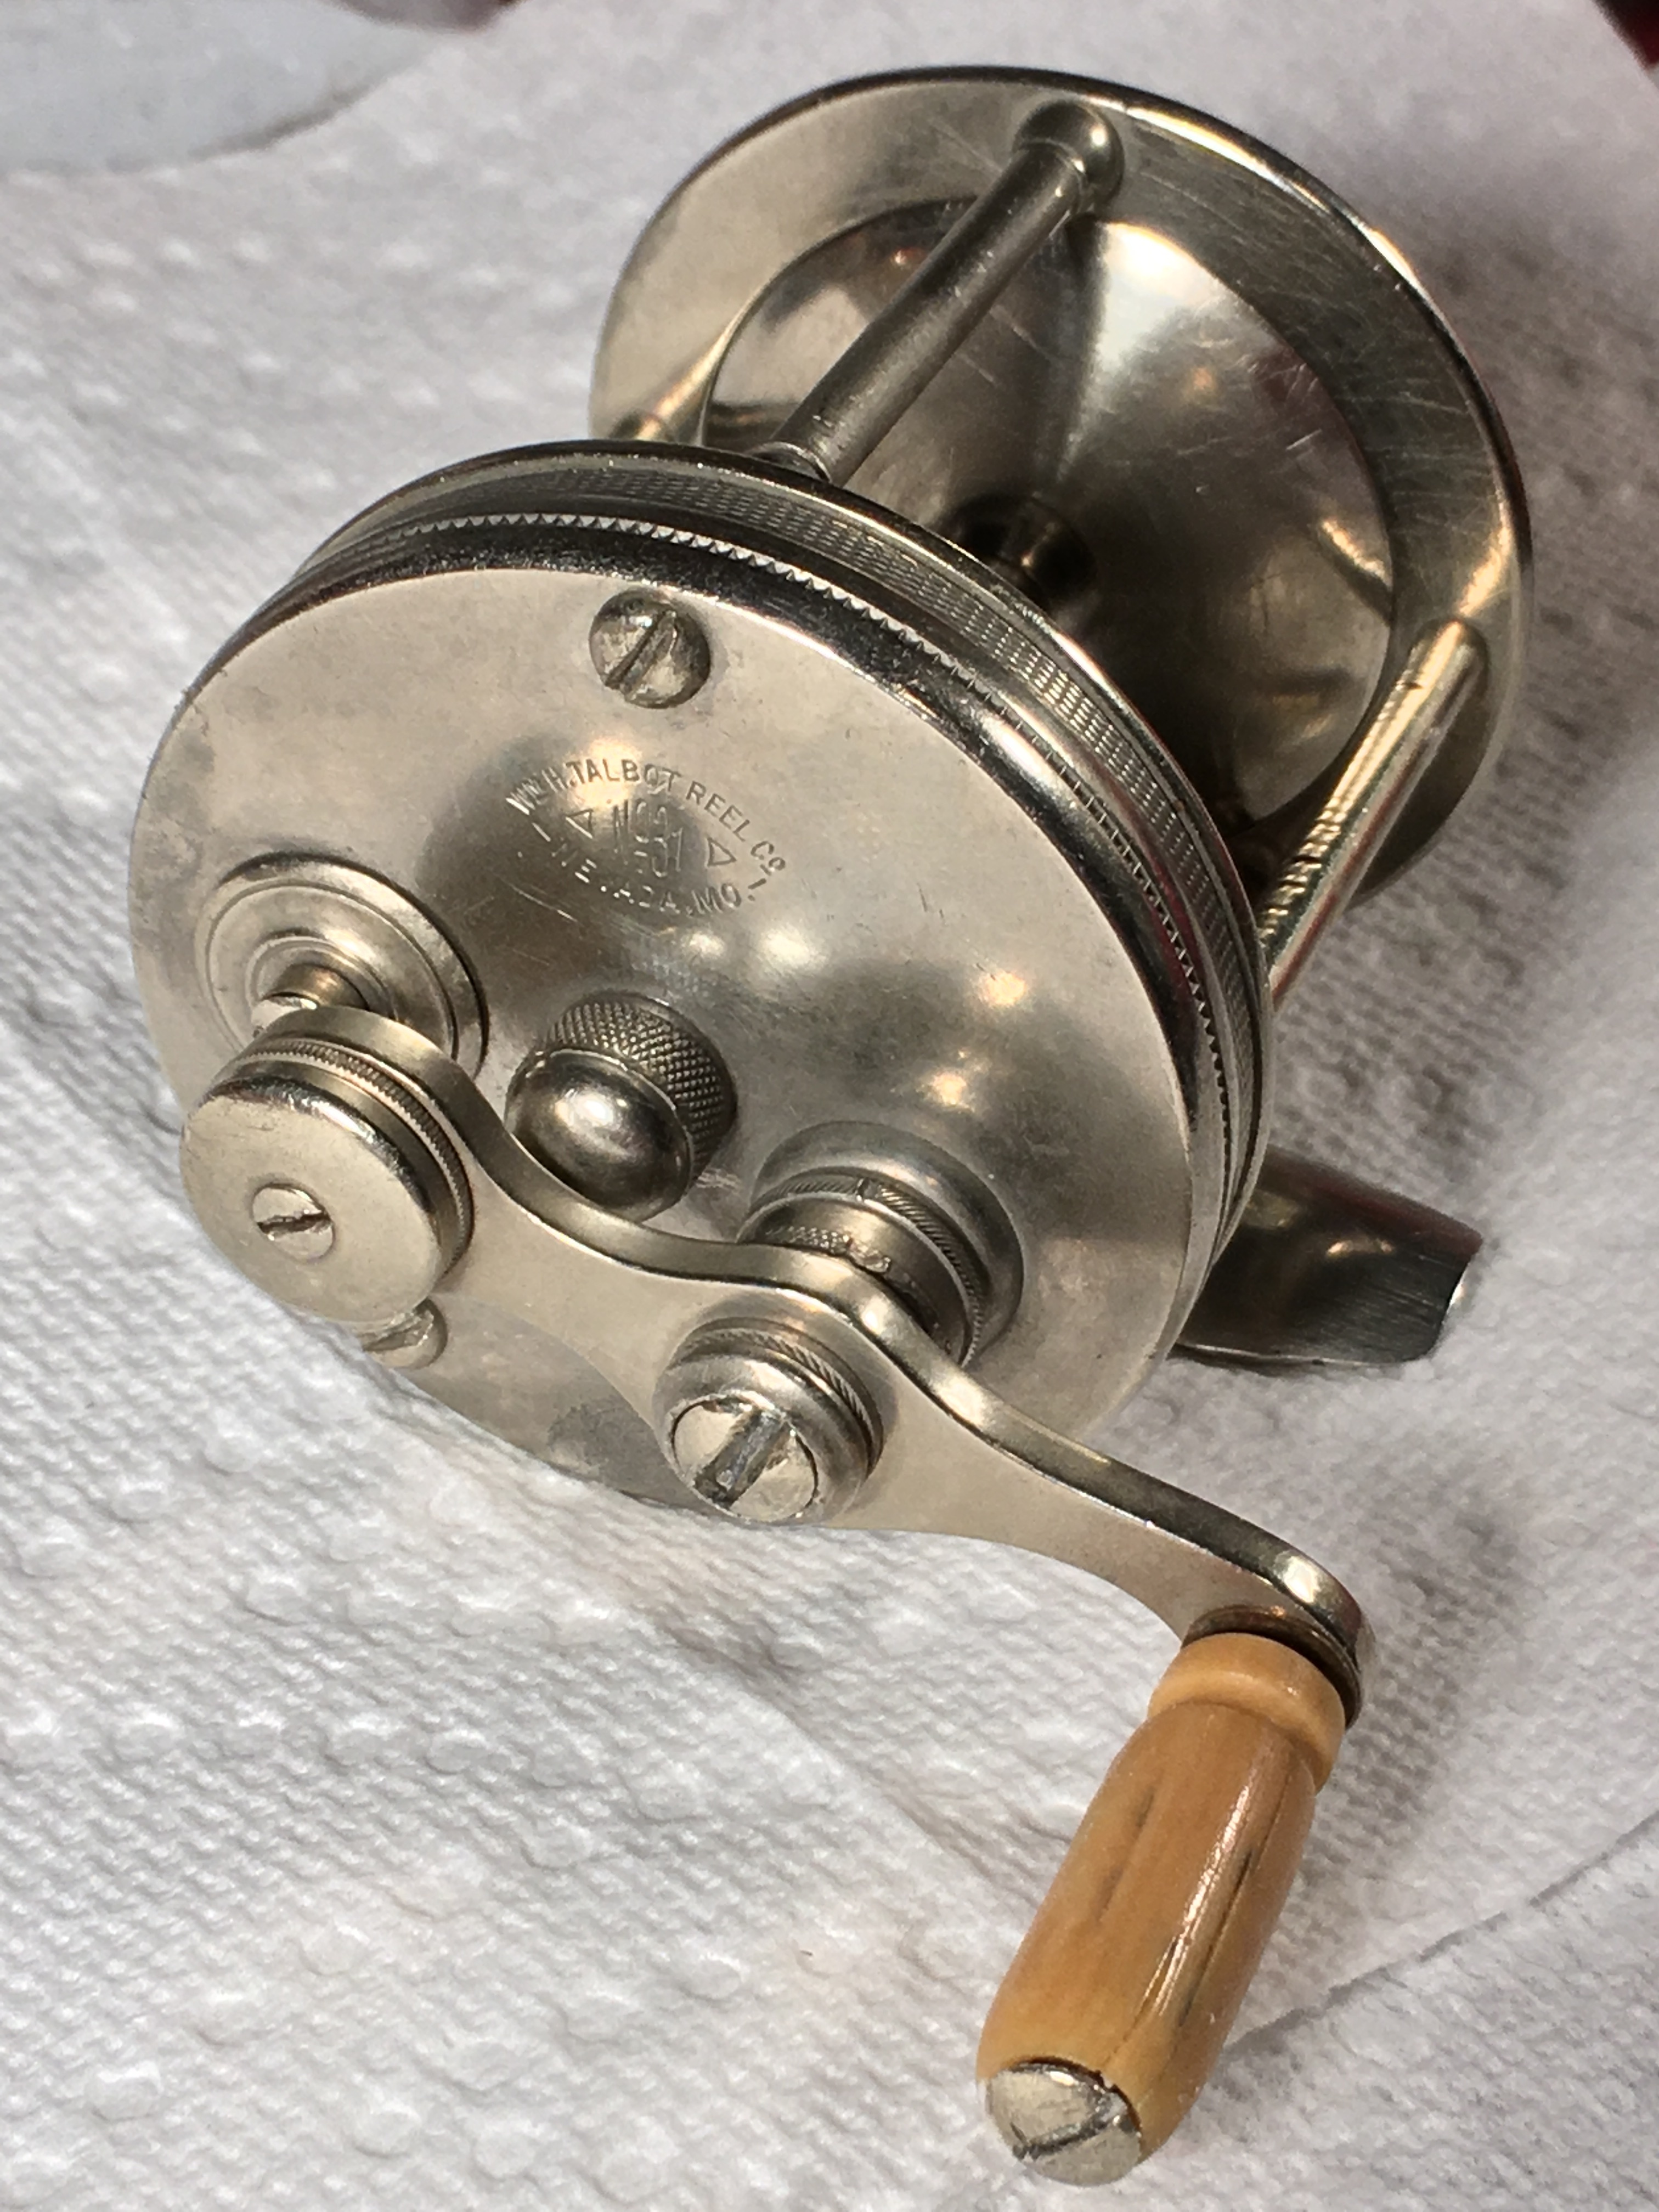 Stabilization of cracked ivory grasps on antique reels - Reel Talk - ORCA